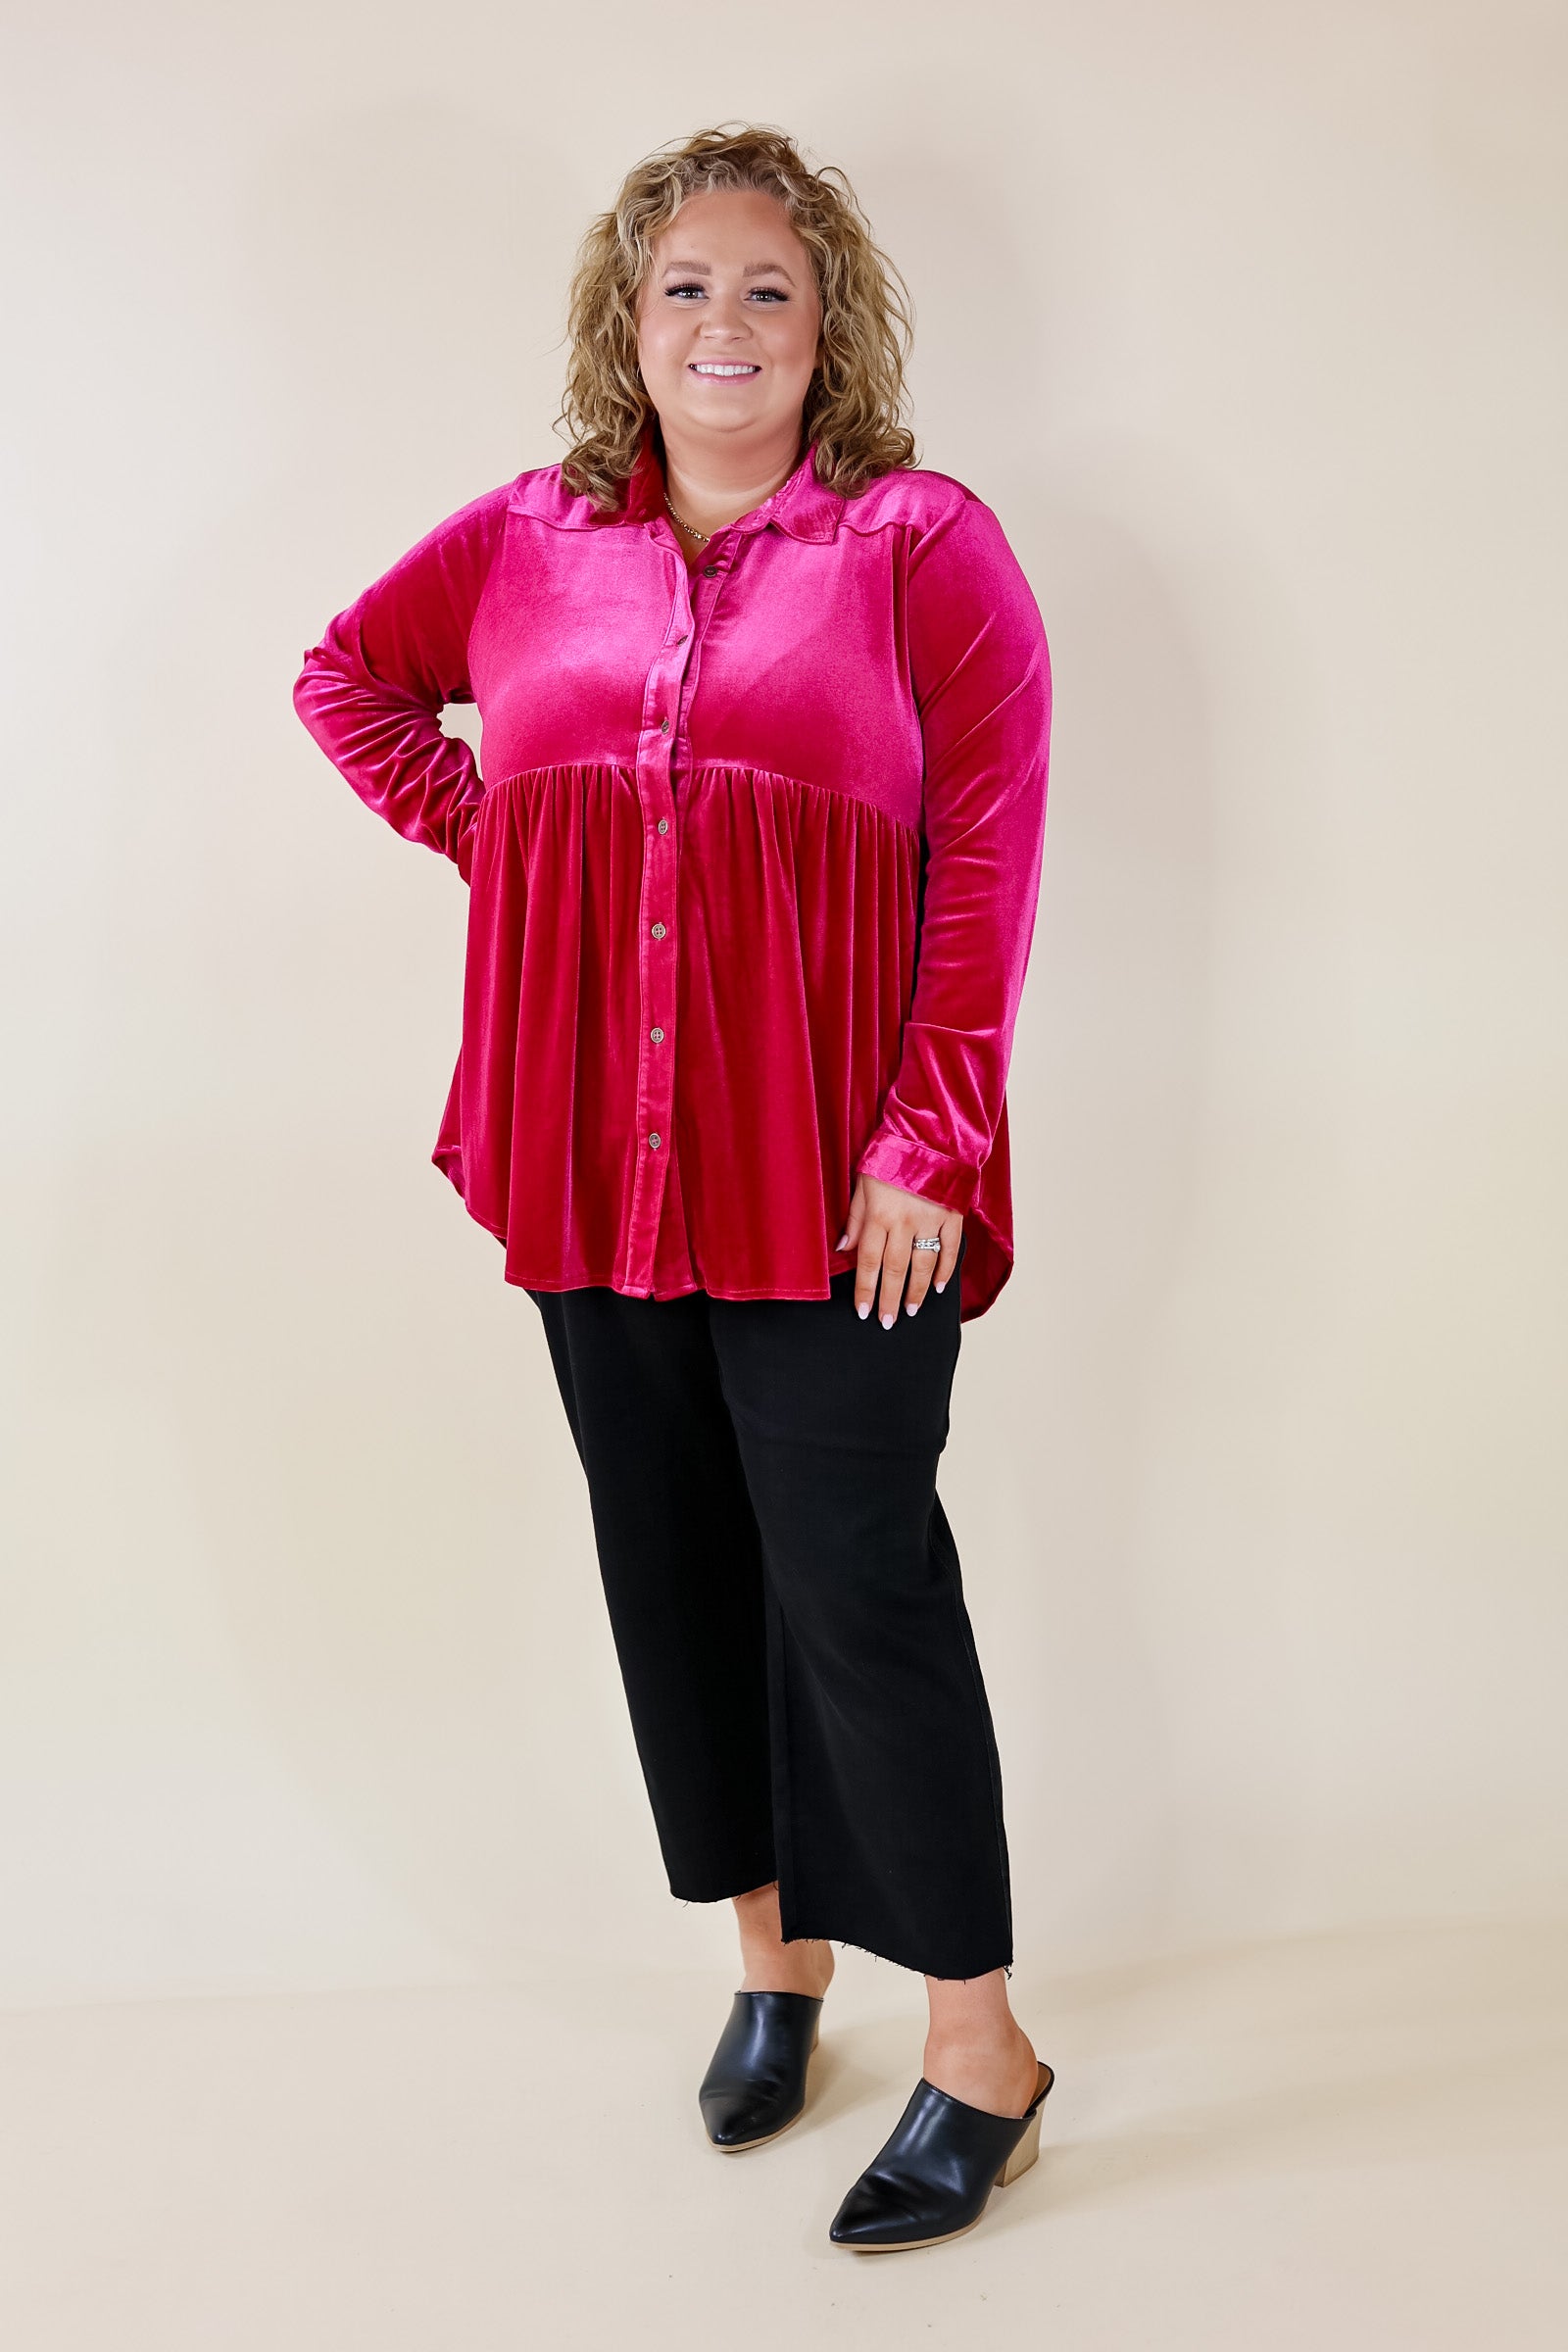 Call Me Yours Button Up Velvet Long Sleeve Babydoll Tunic Top in Raspberry Pink - Giddy Up Glamour Boutique